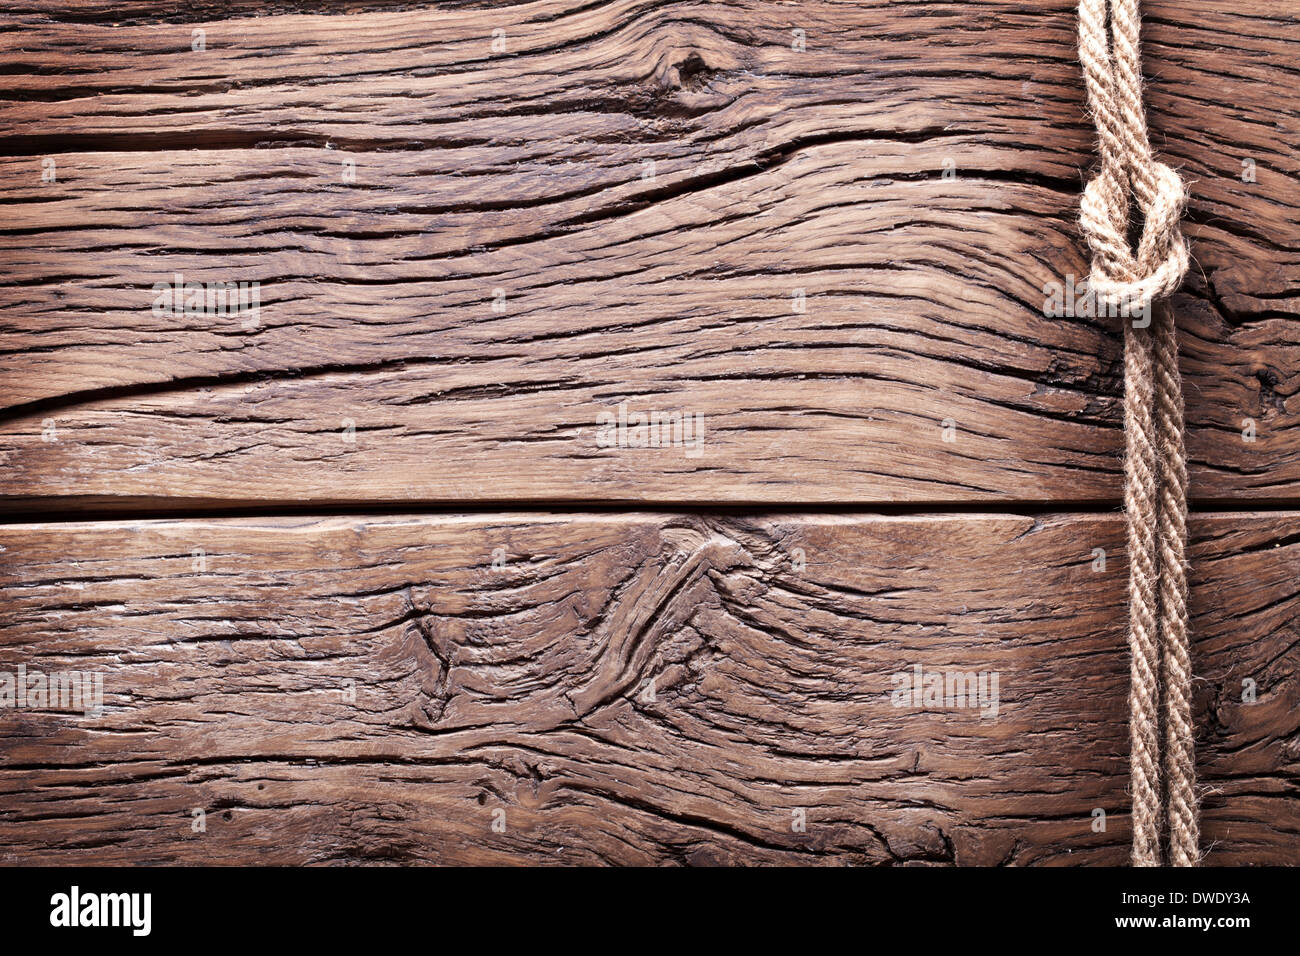 Sailor's knot over old wooden background. Stock Photo